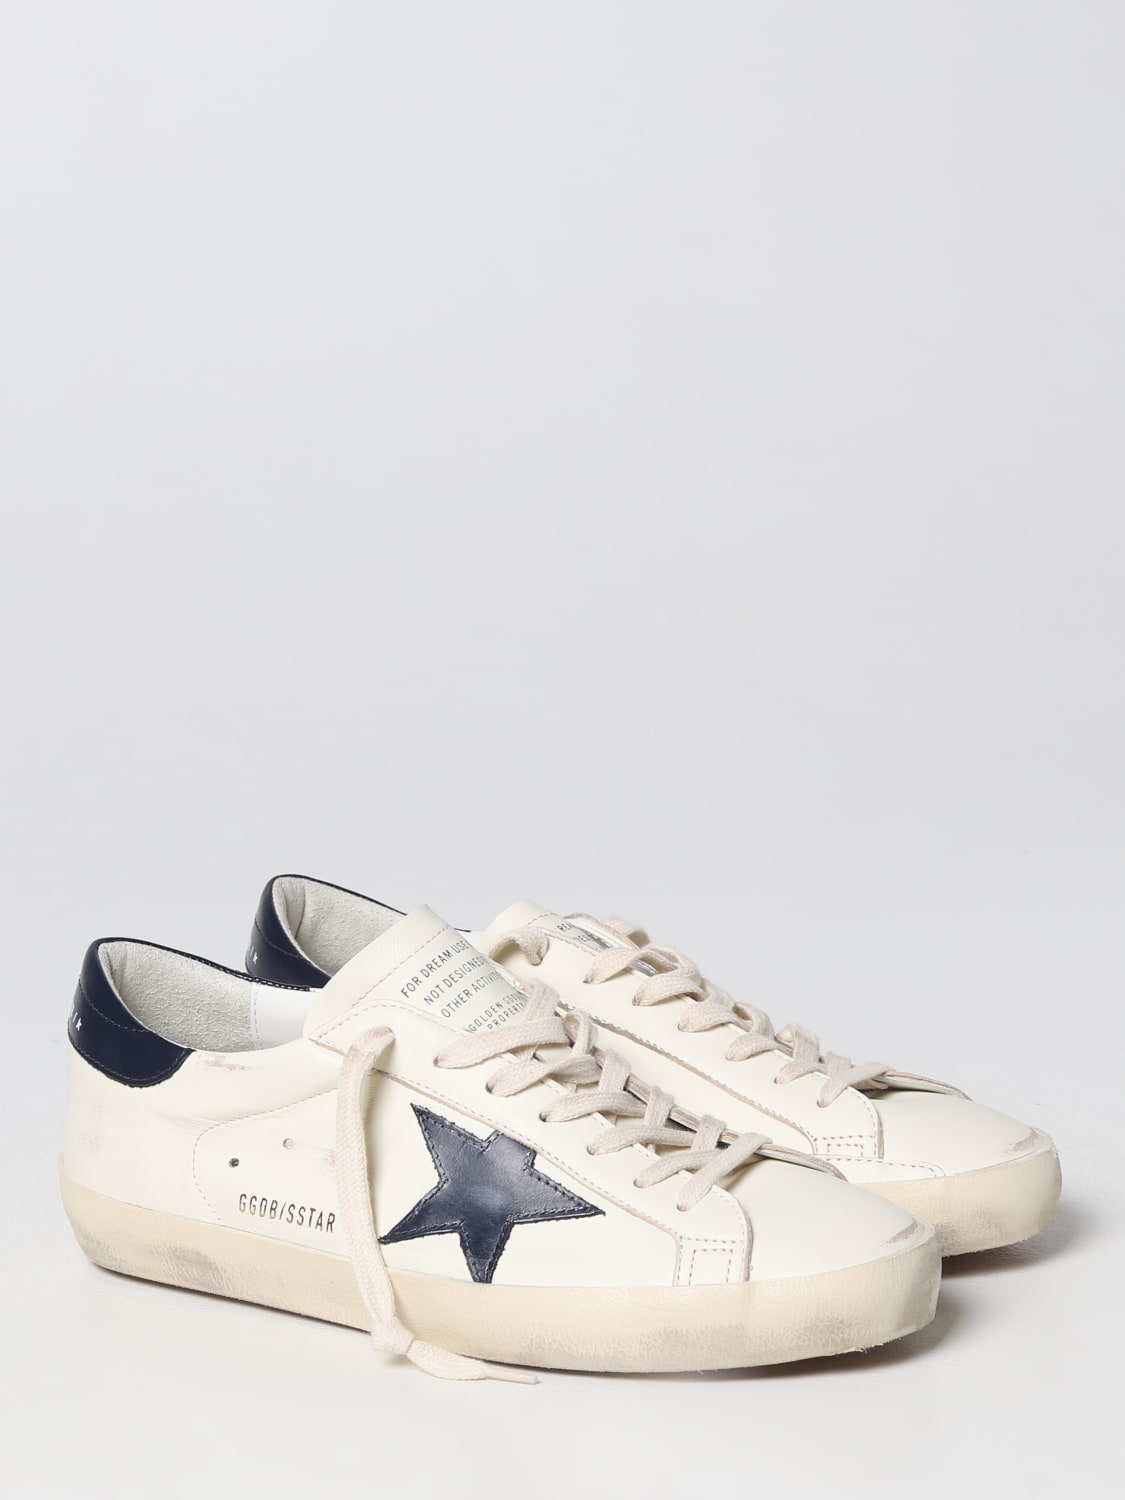 GOLDEN GOOSE: Running Sole sneakers in used nappa leather - White ...